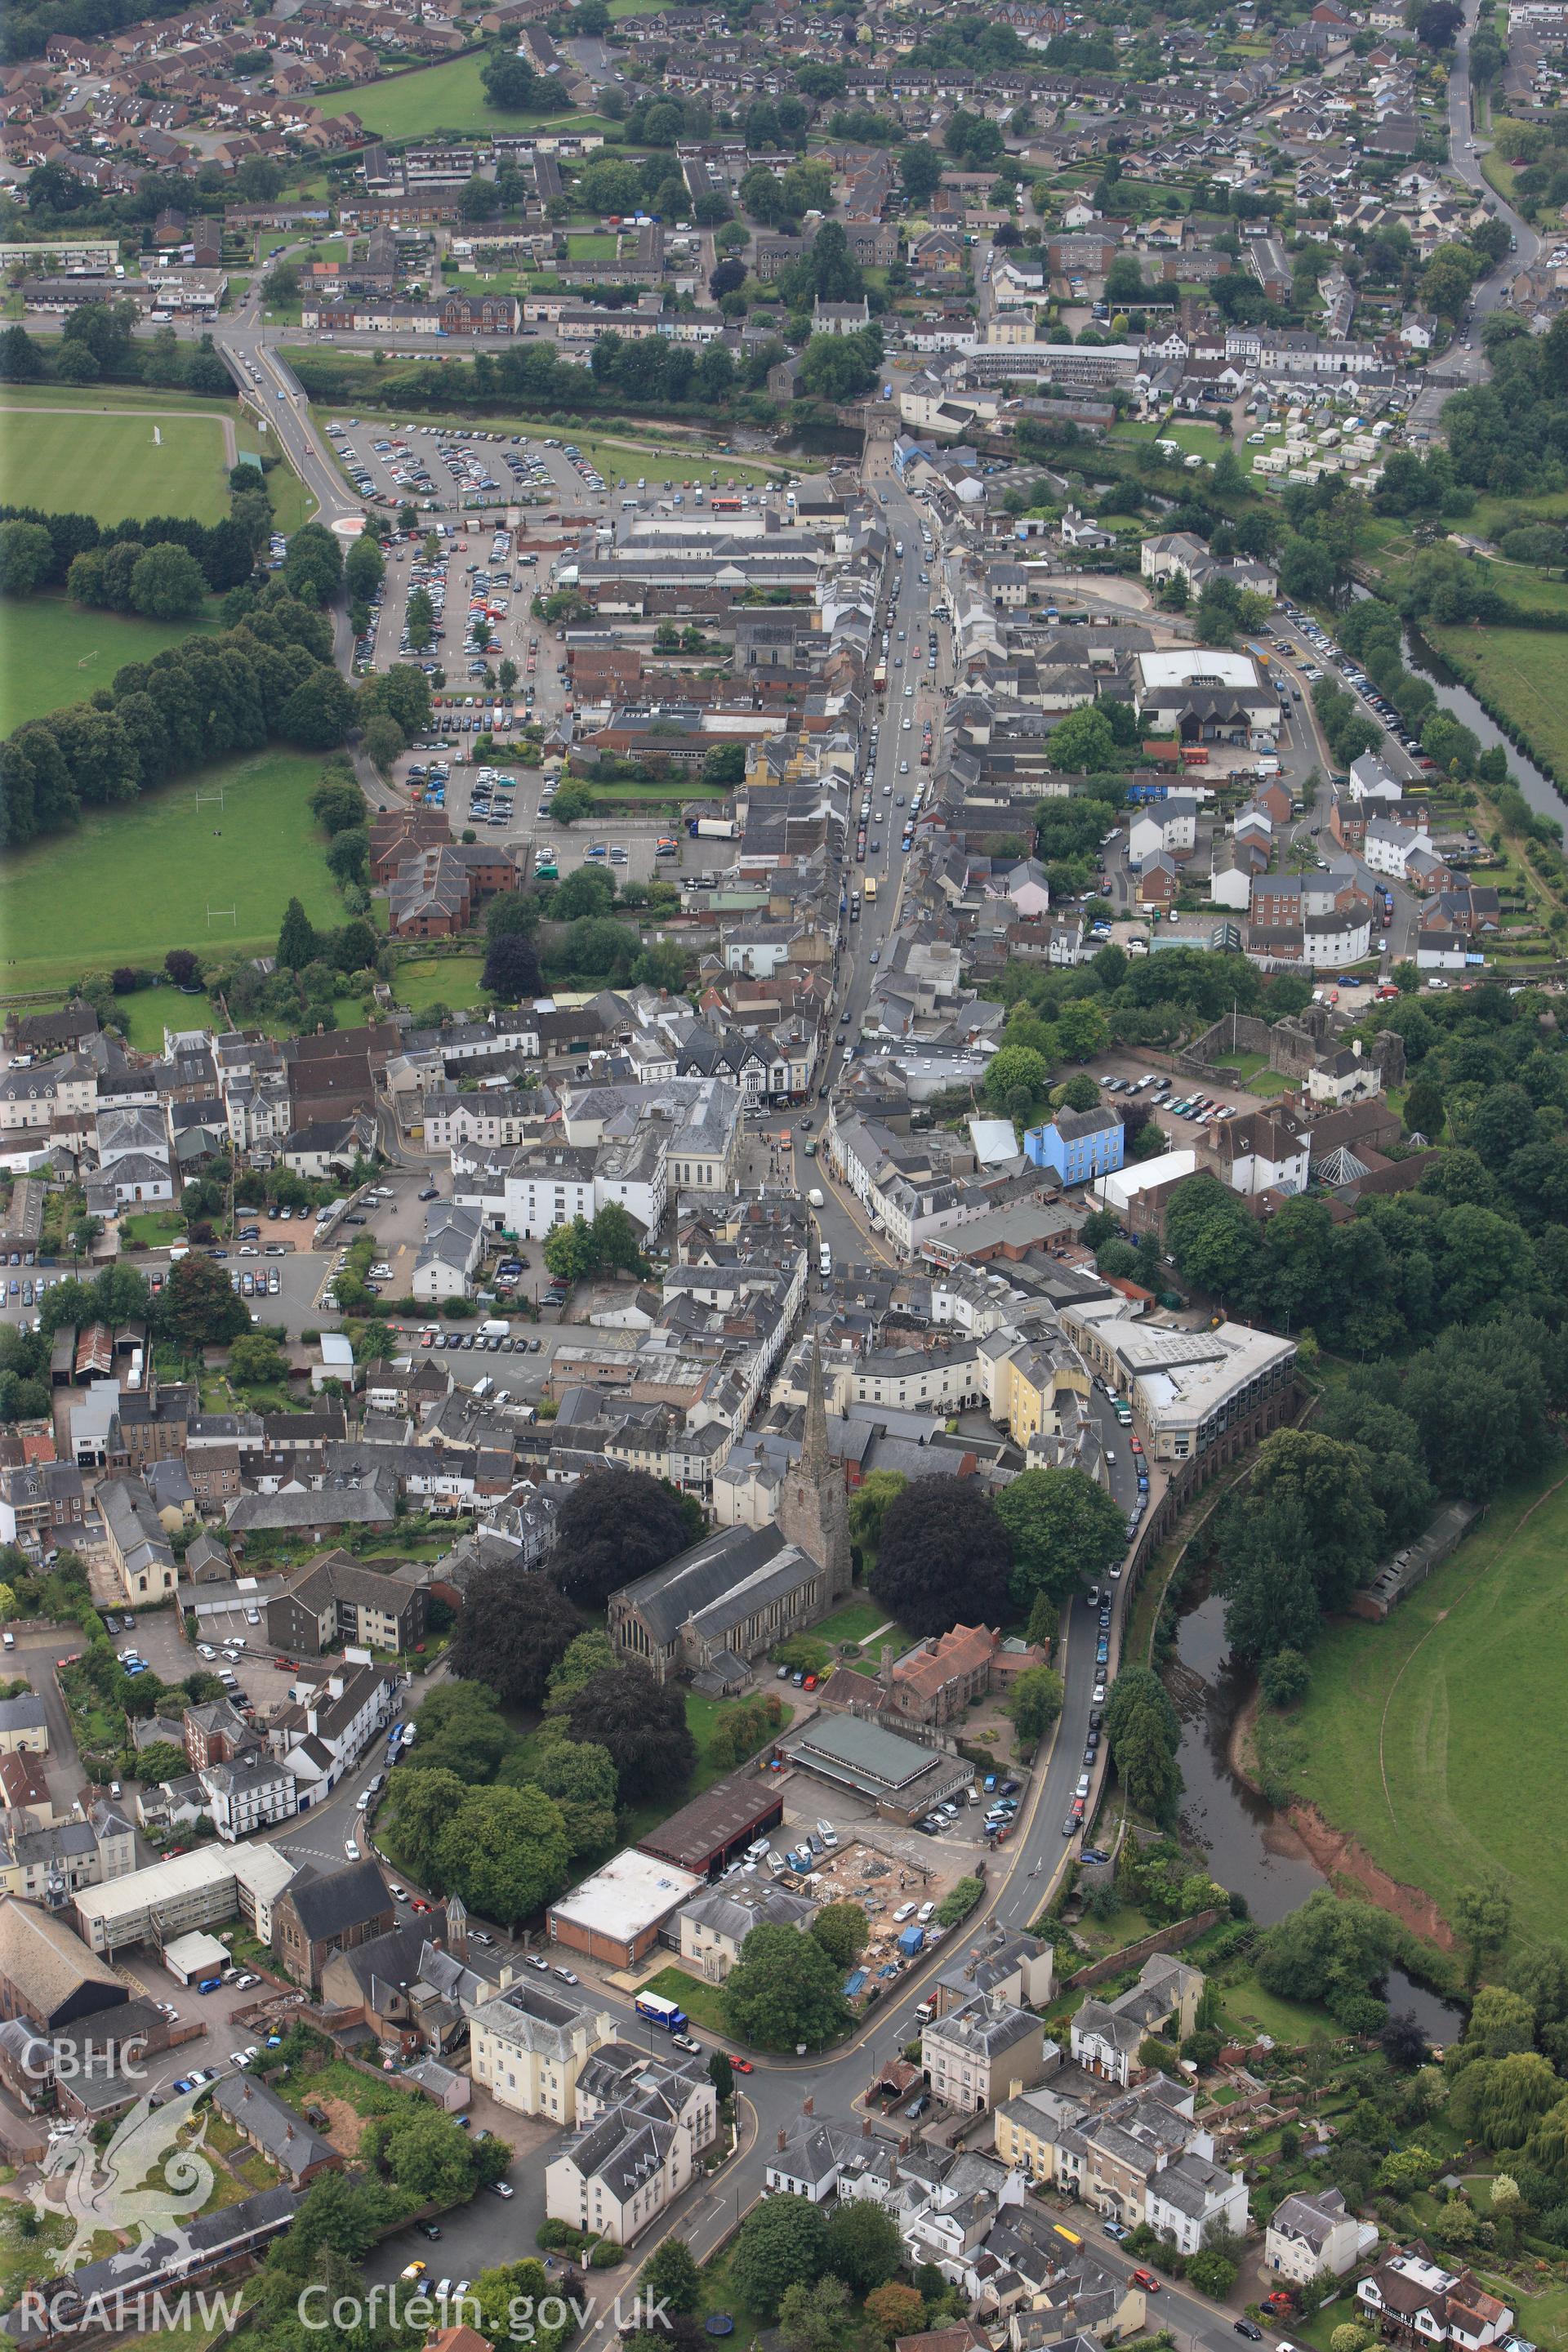 RCAHMW colour oblique photograph of Monmouth, with St Mary the Virgin Church. Taken by Toby Driver on 20/07/2011.